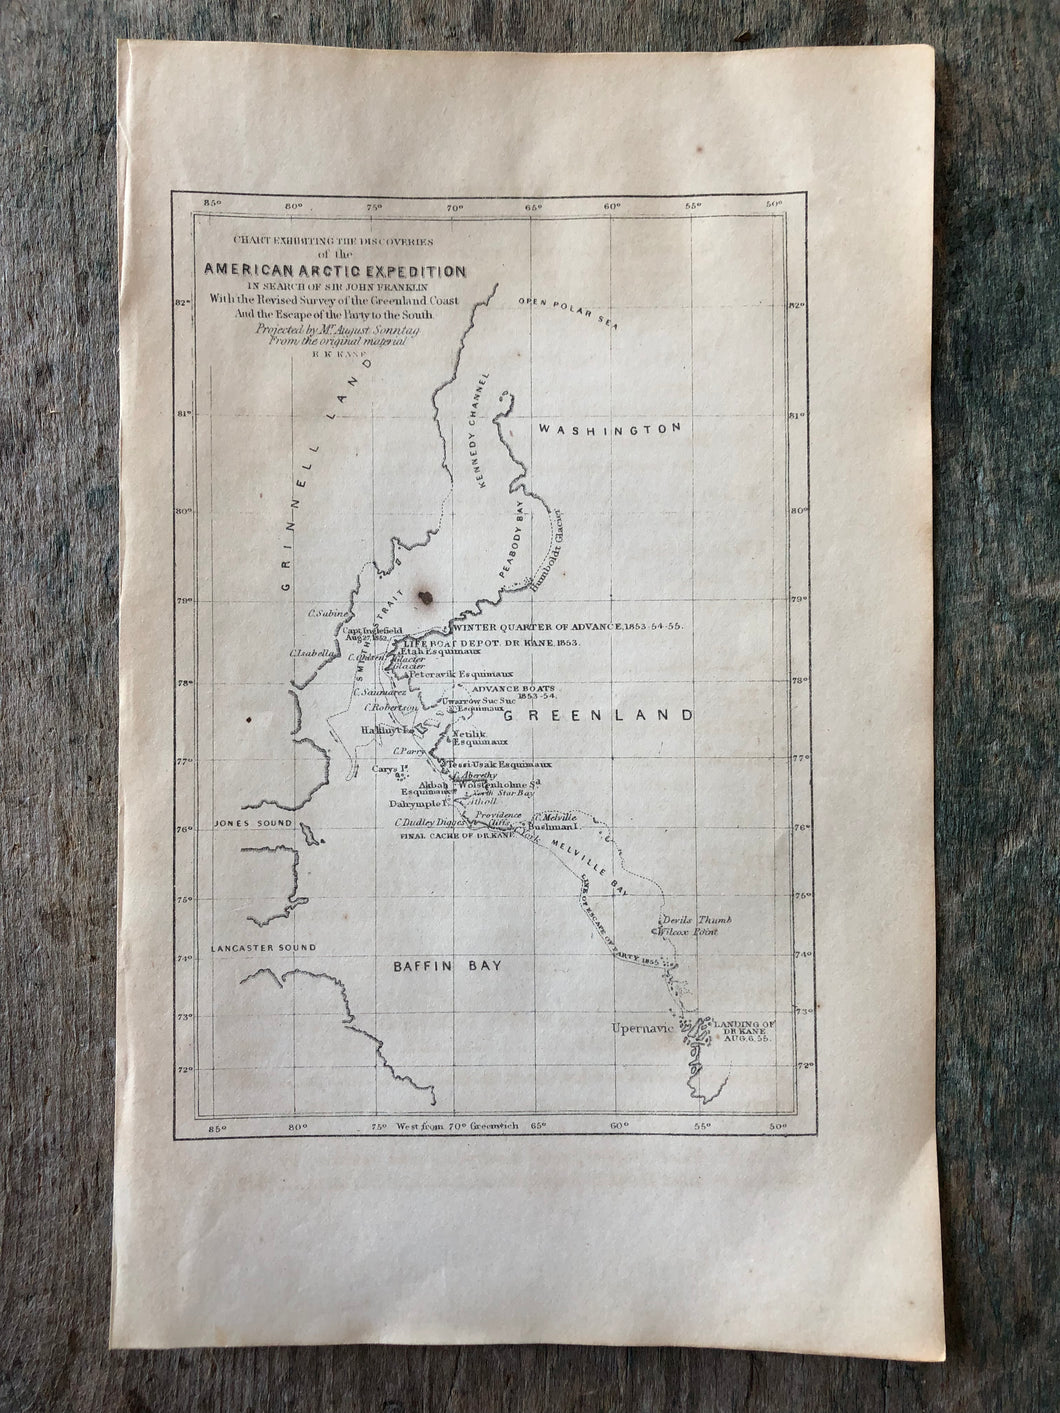 American Arctic Expedition Map. Print from “Arctic Exploration: the Second Grinnell Expedition to Find Sir John Franklin, 1853, 54, 55” by Elisha Kent Kane